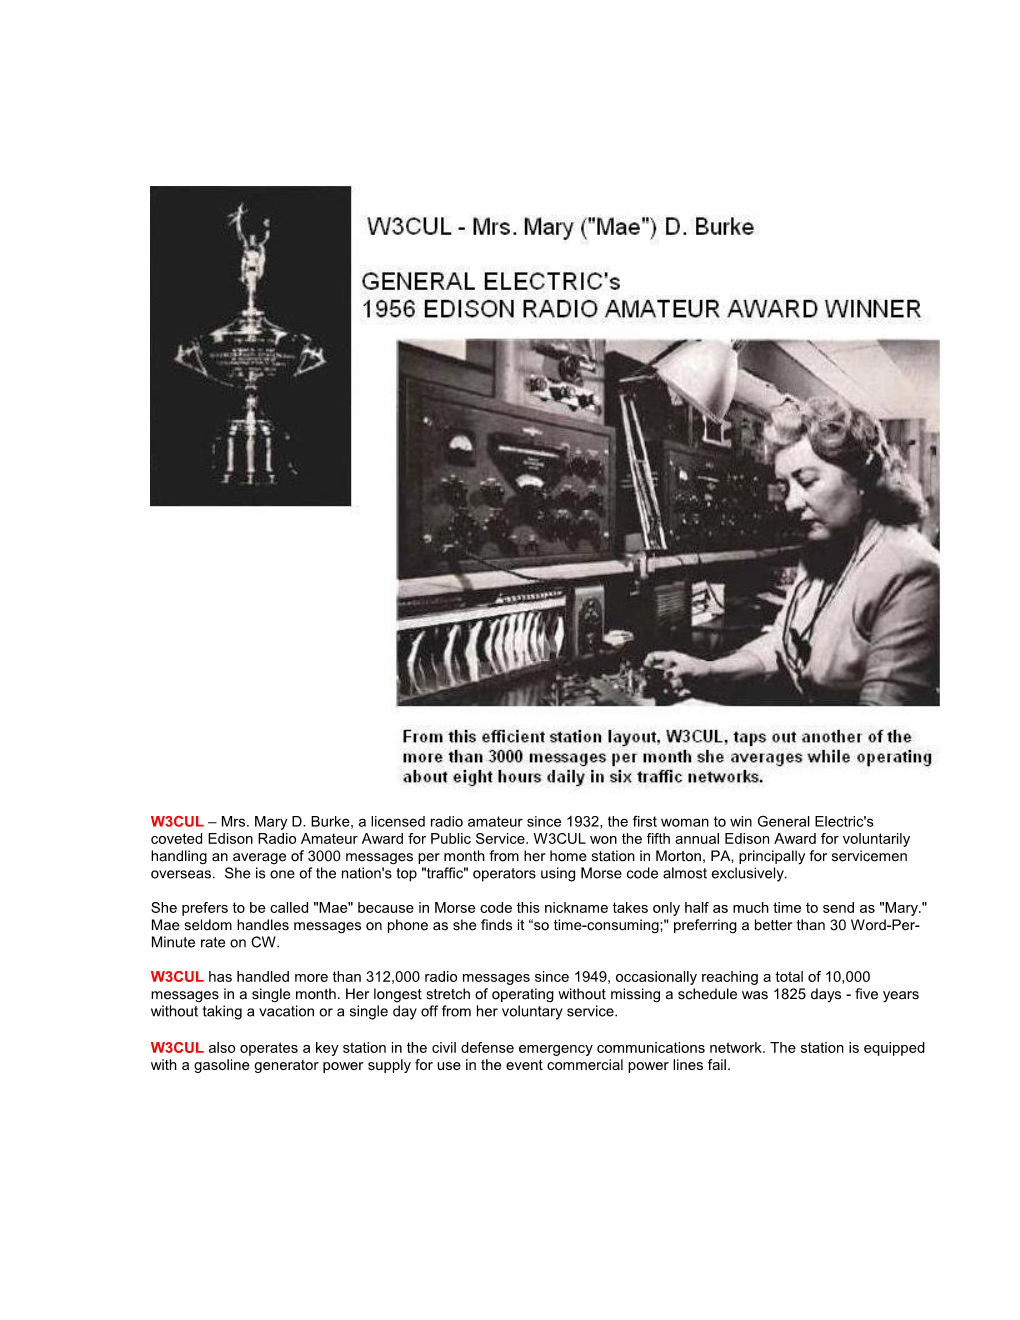 W3CUL Mrs. Mary D. Burke, a Licensed Radio Amateur Since 1932, the First Woman to Win General